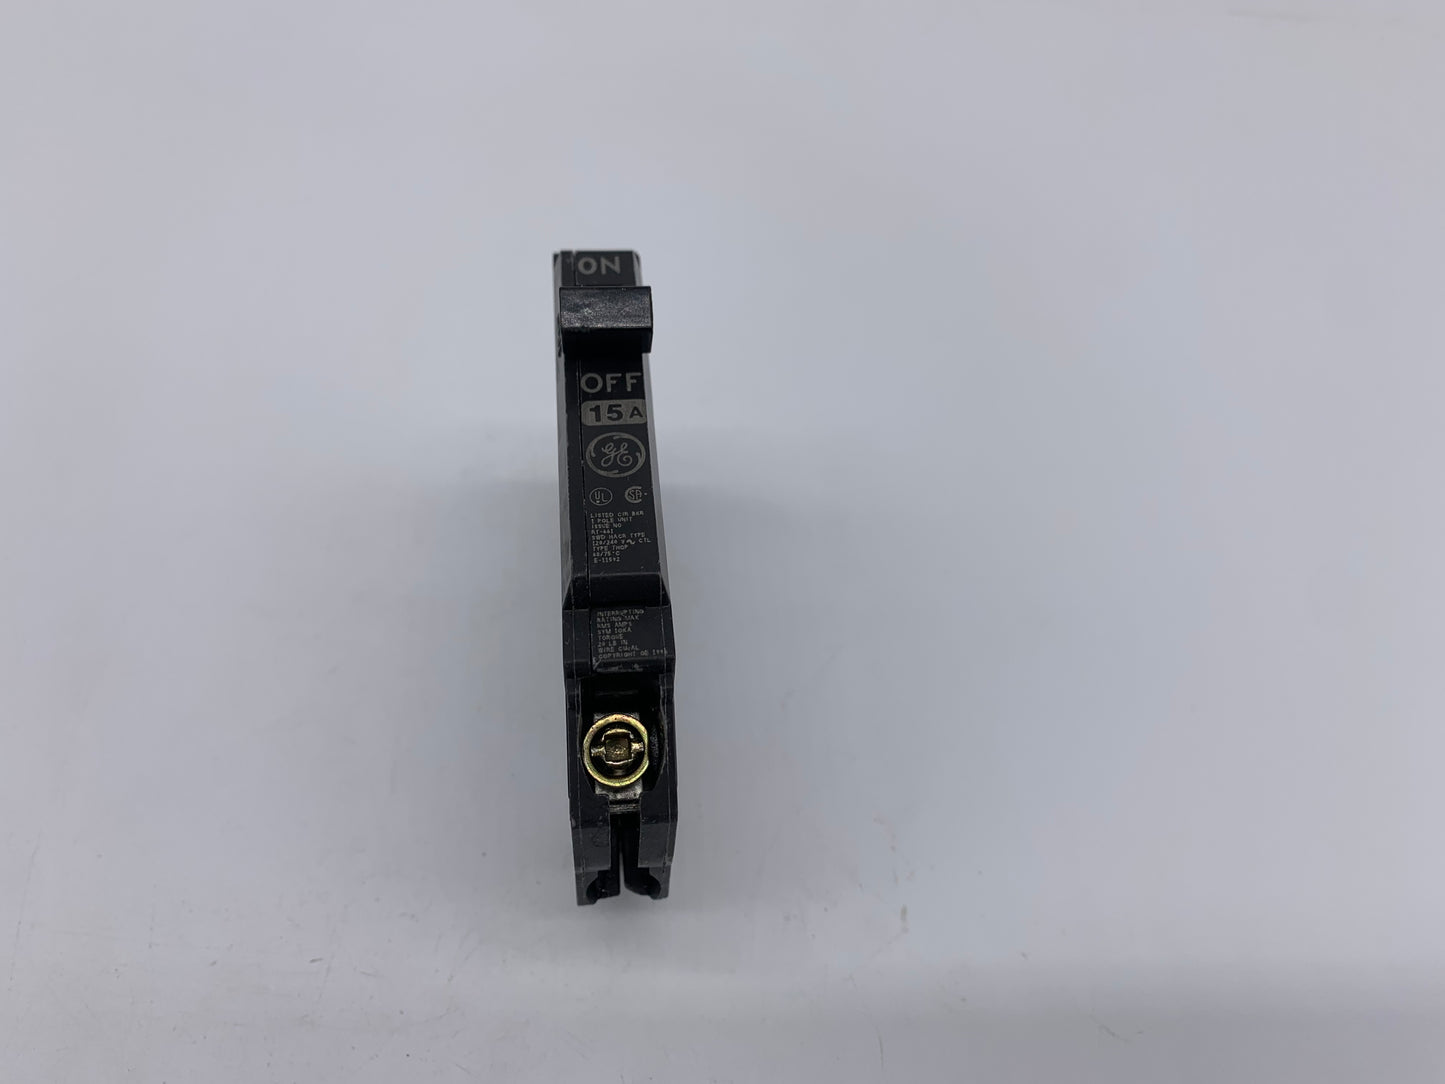 GE THQP115 15A 120V 1P Type THQP Circuit Breakers - Reconditioned